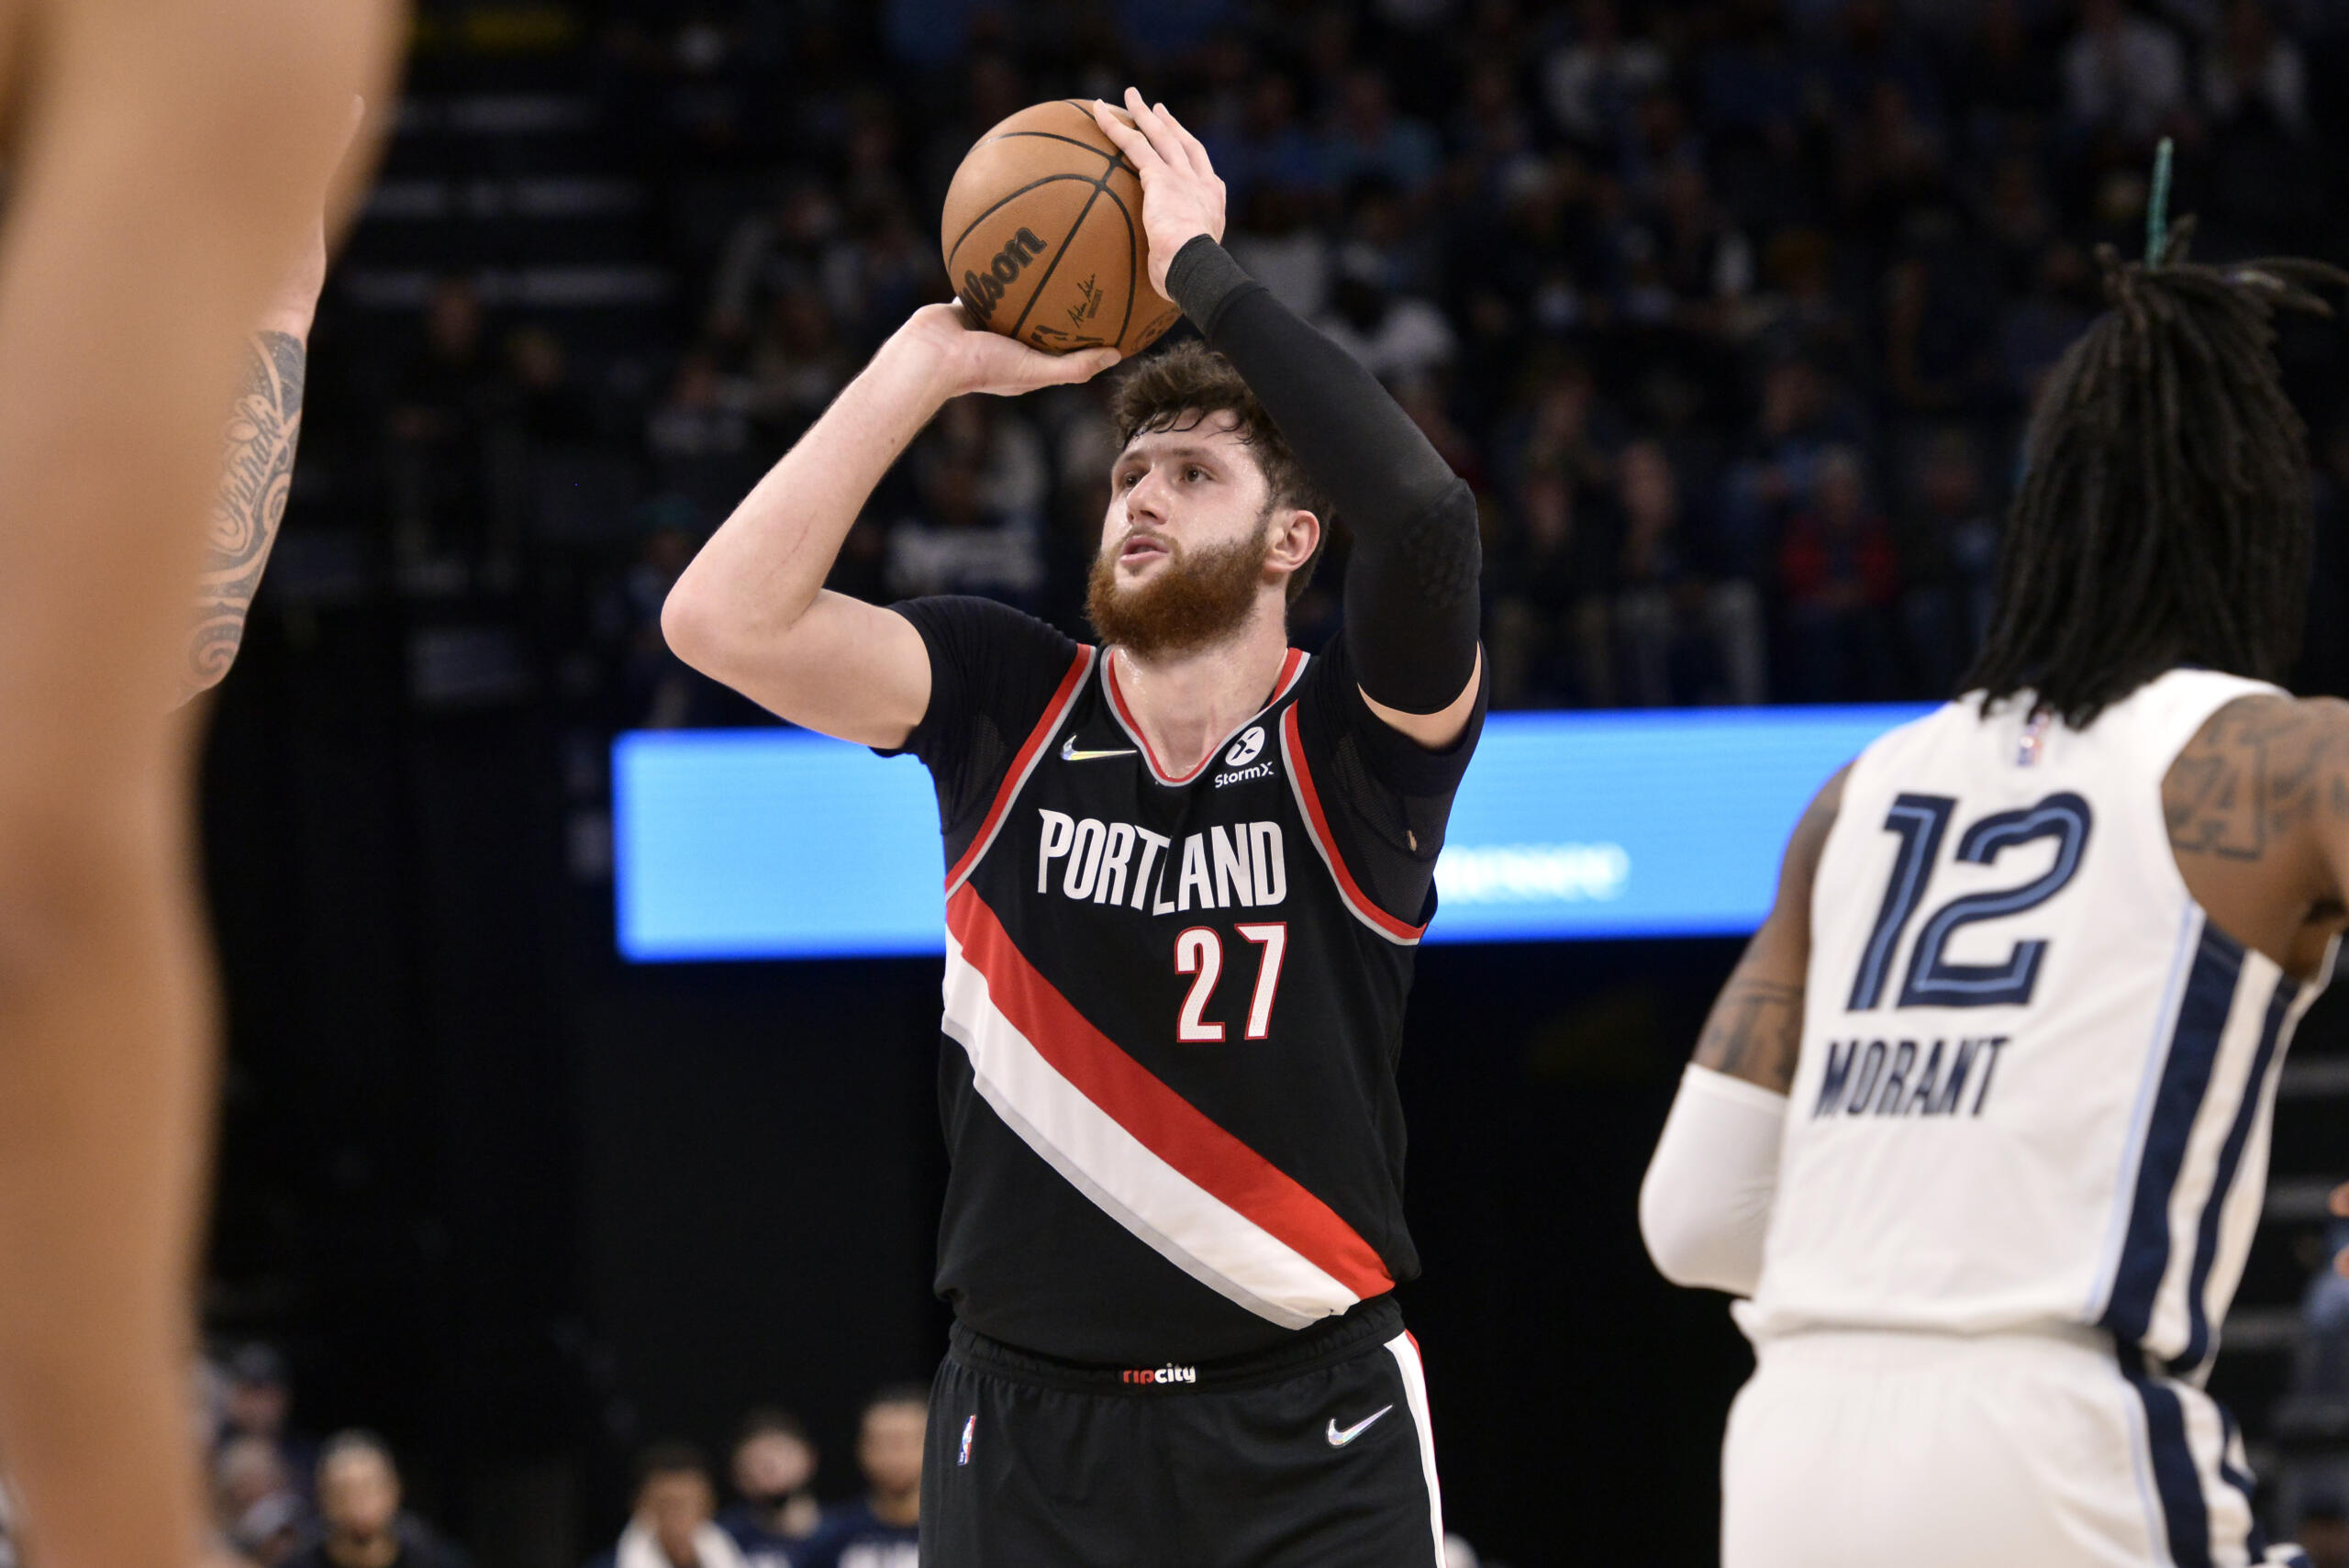 Portland Trail Blazers center Jusuf Nurkic (27) shoots the ball against the Memphis Grizzlies in the first half of an NBA basketball game Wednesday, Feb. 16, 2022, in Memphis, Tenn.